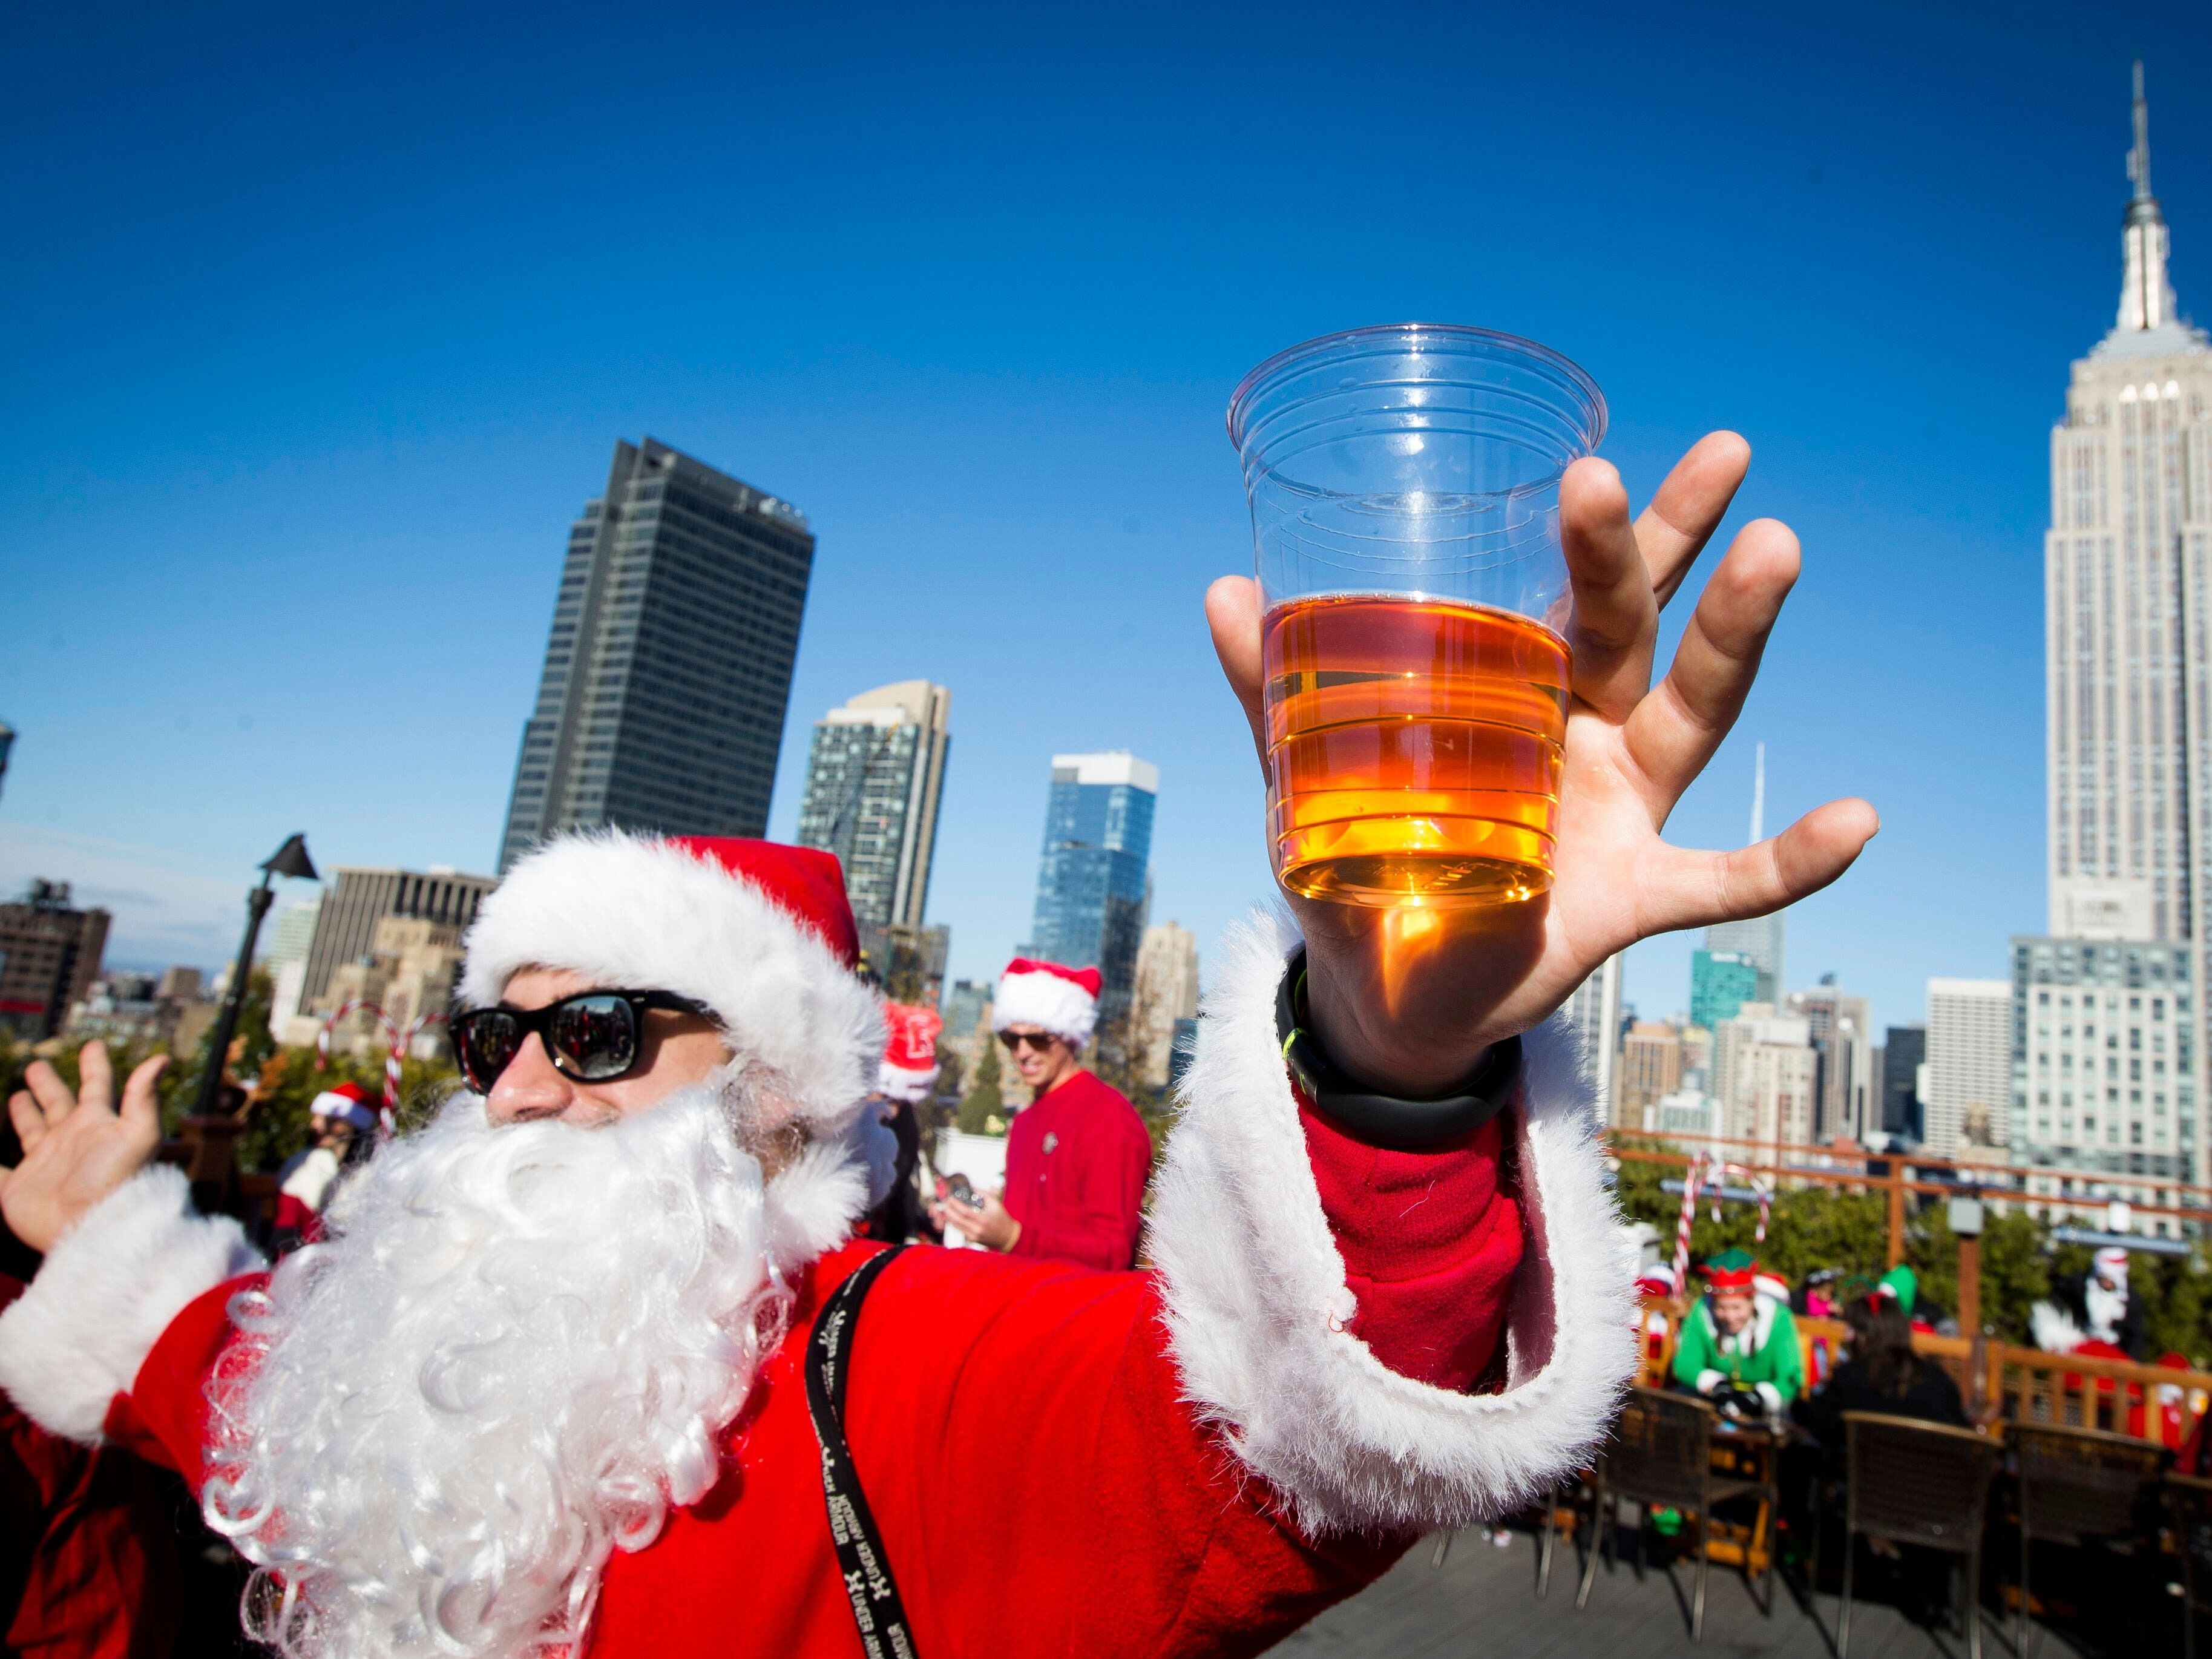 Thousands of revellers descend on NYC for annual Santa-themed bar crawl SantaCon